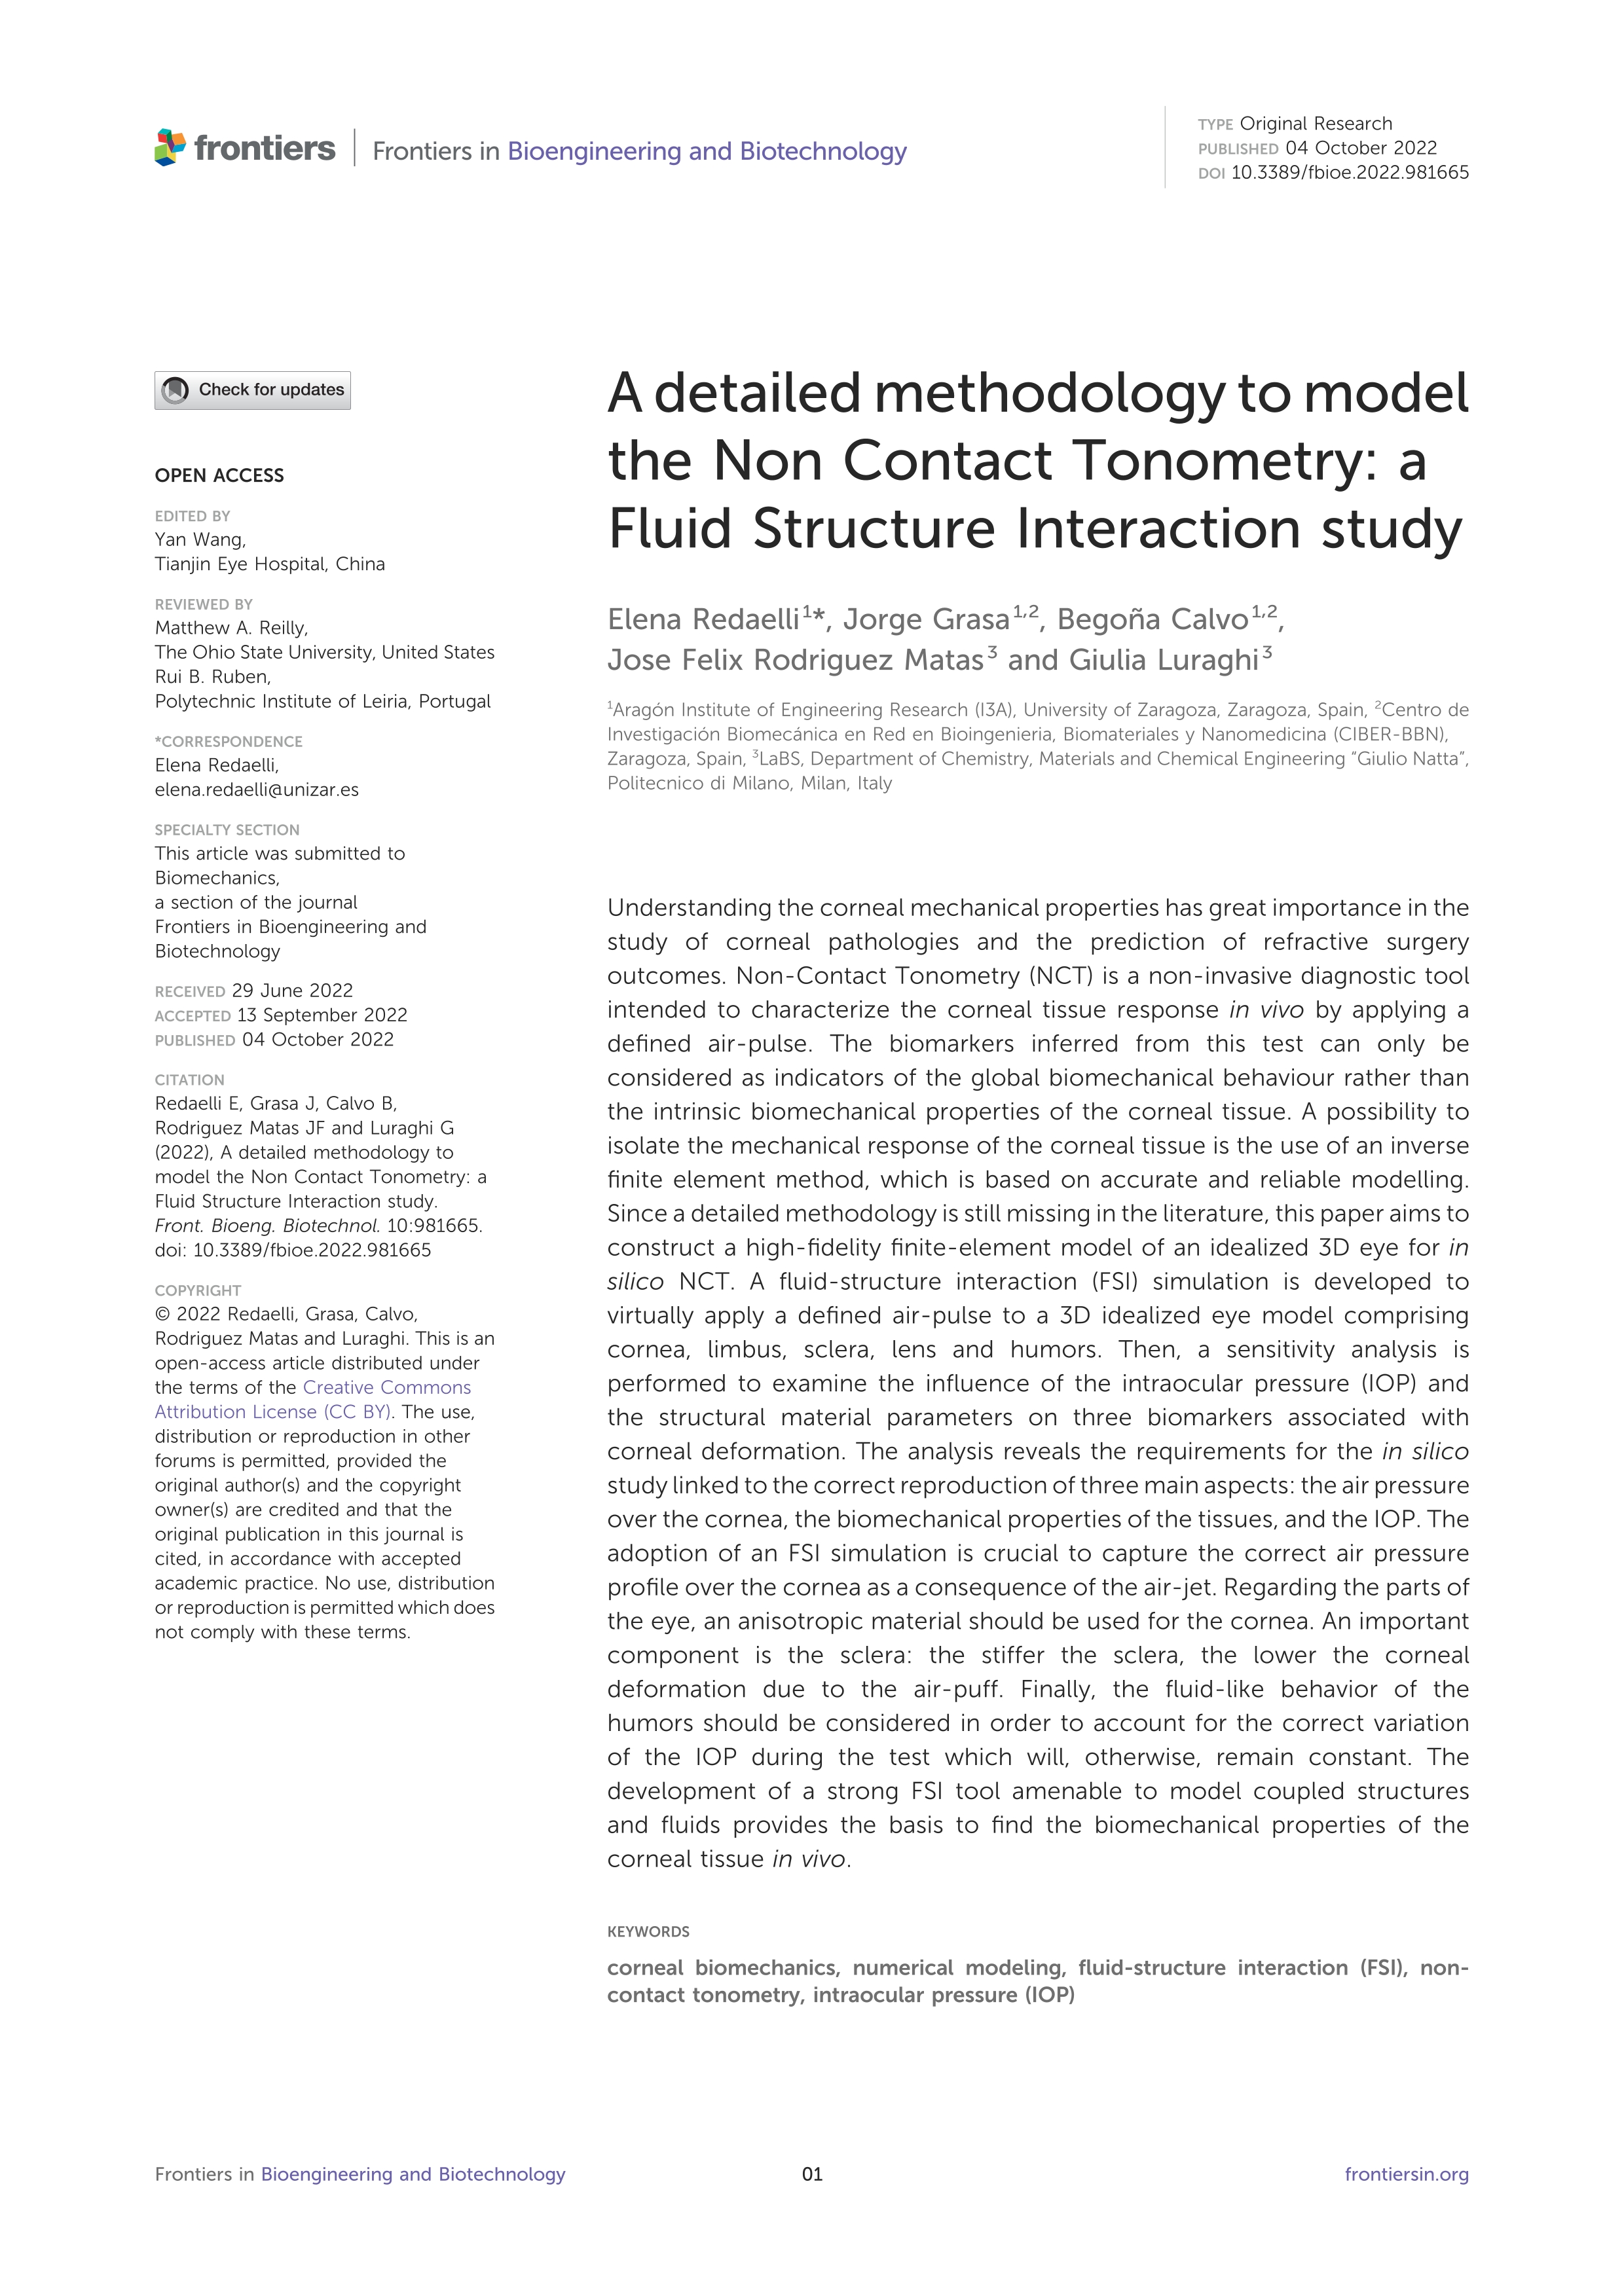 A detailed methodology to model the Non Contact Tonometry: a Fluid Structure Interaction study